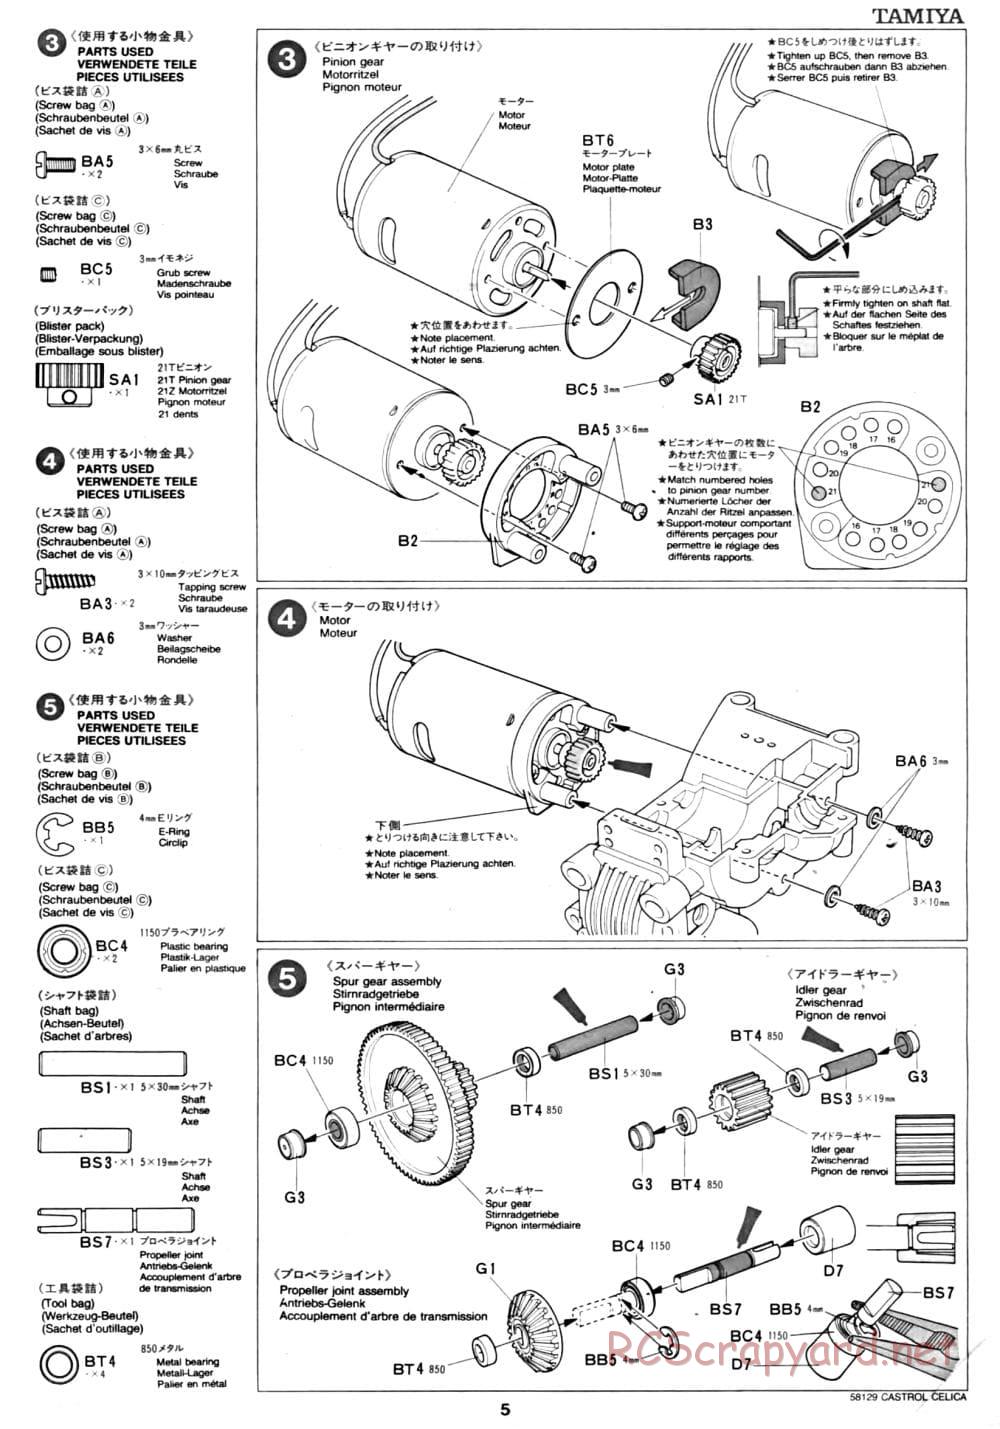 Tamiya - Castrol Celica 93 Monte-Carlo - TA-02 Chassis - Manual - Page 5